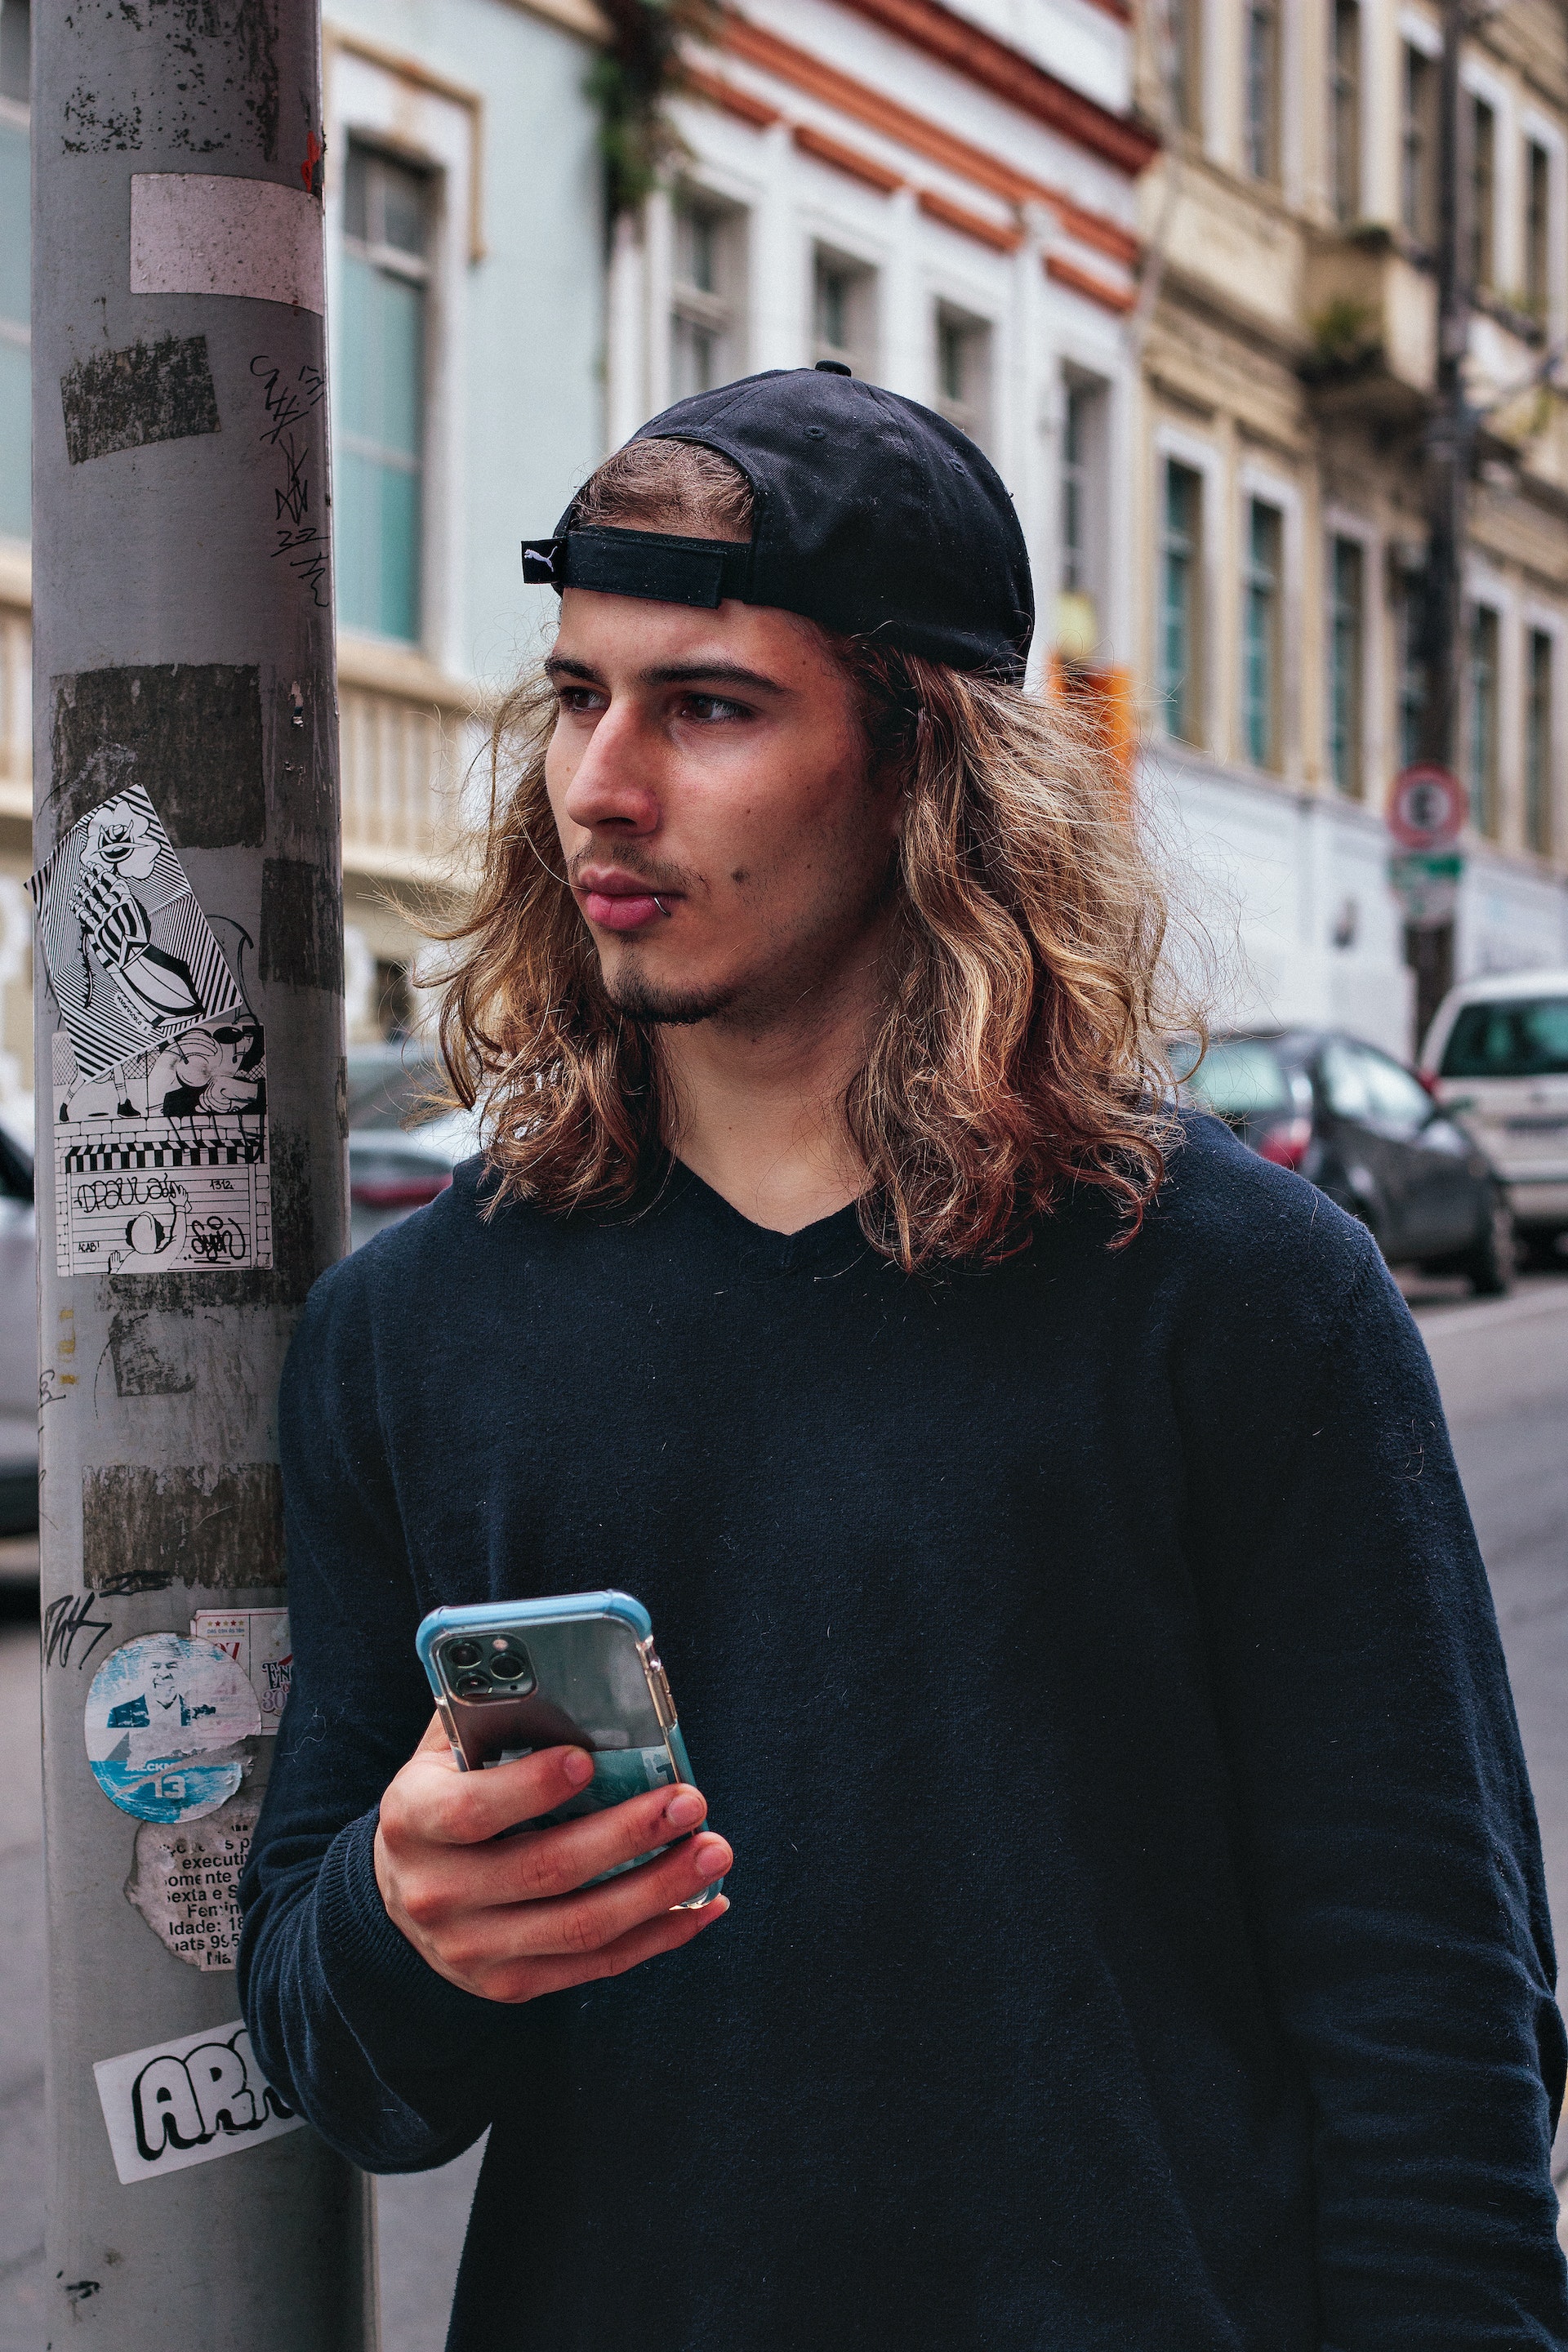 A man standing with a phone in his hand | Source: Pexels